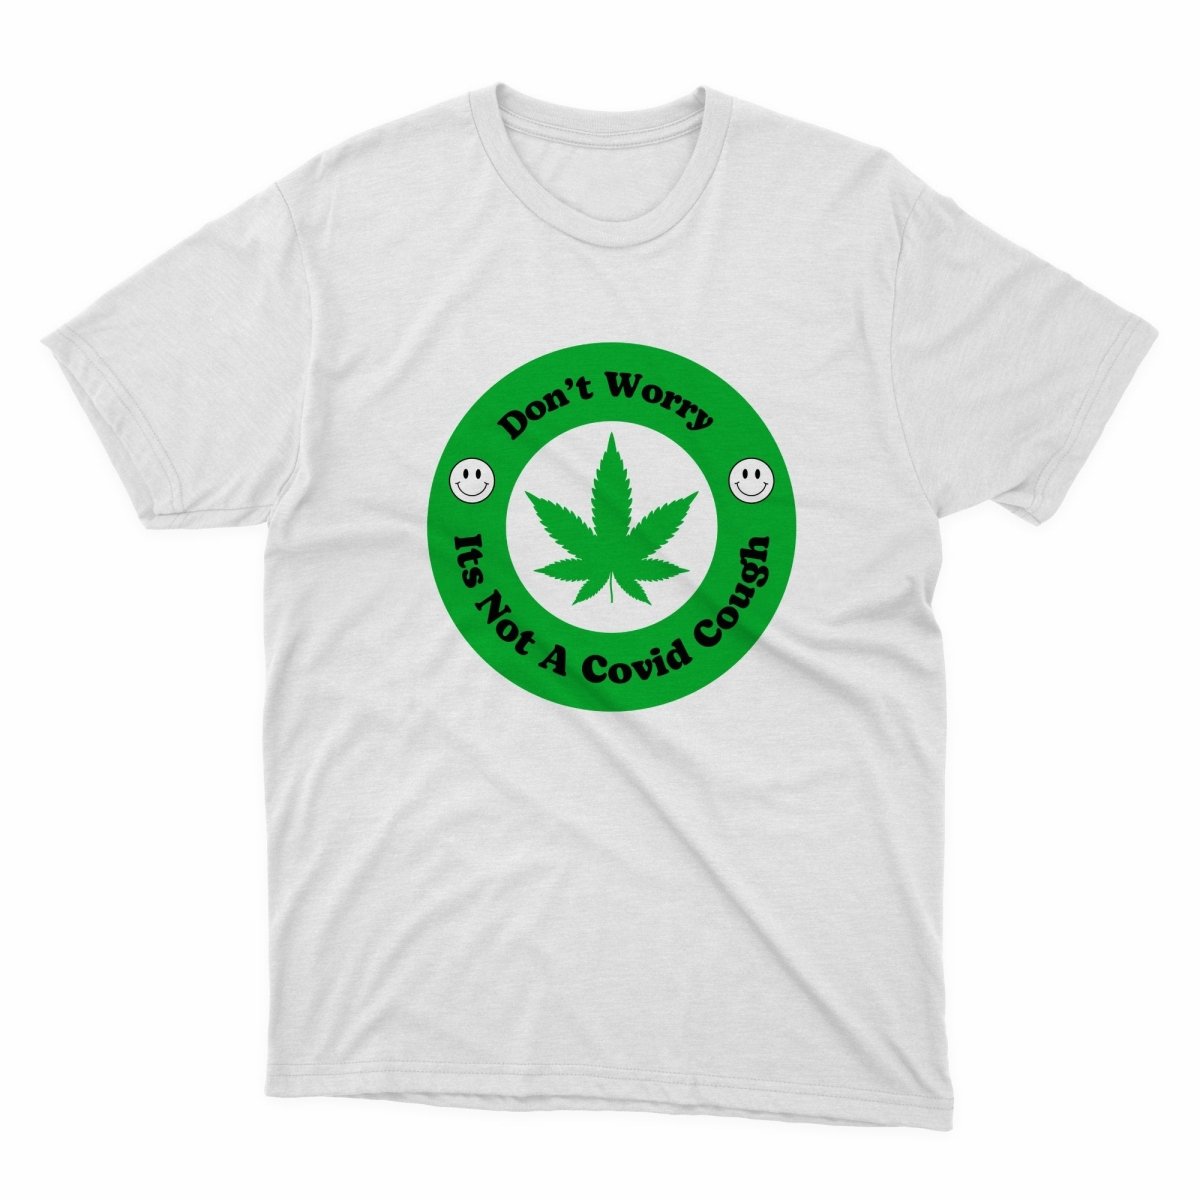 Not A Covid Cough Shirt - stickerbullNot A Covid Cough ShirtShirtsPrintifystickerbull21438509905487046262WhiteSa white t - shirt with a green circle that says don't want to